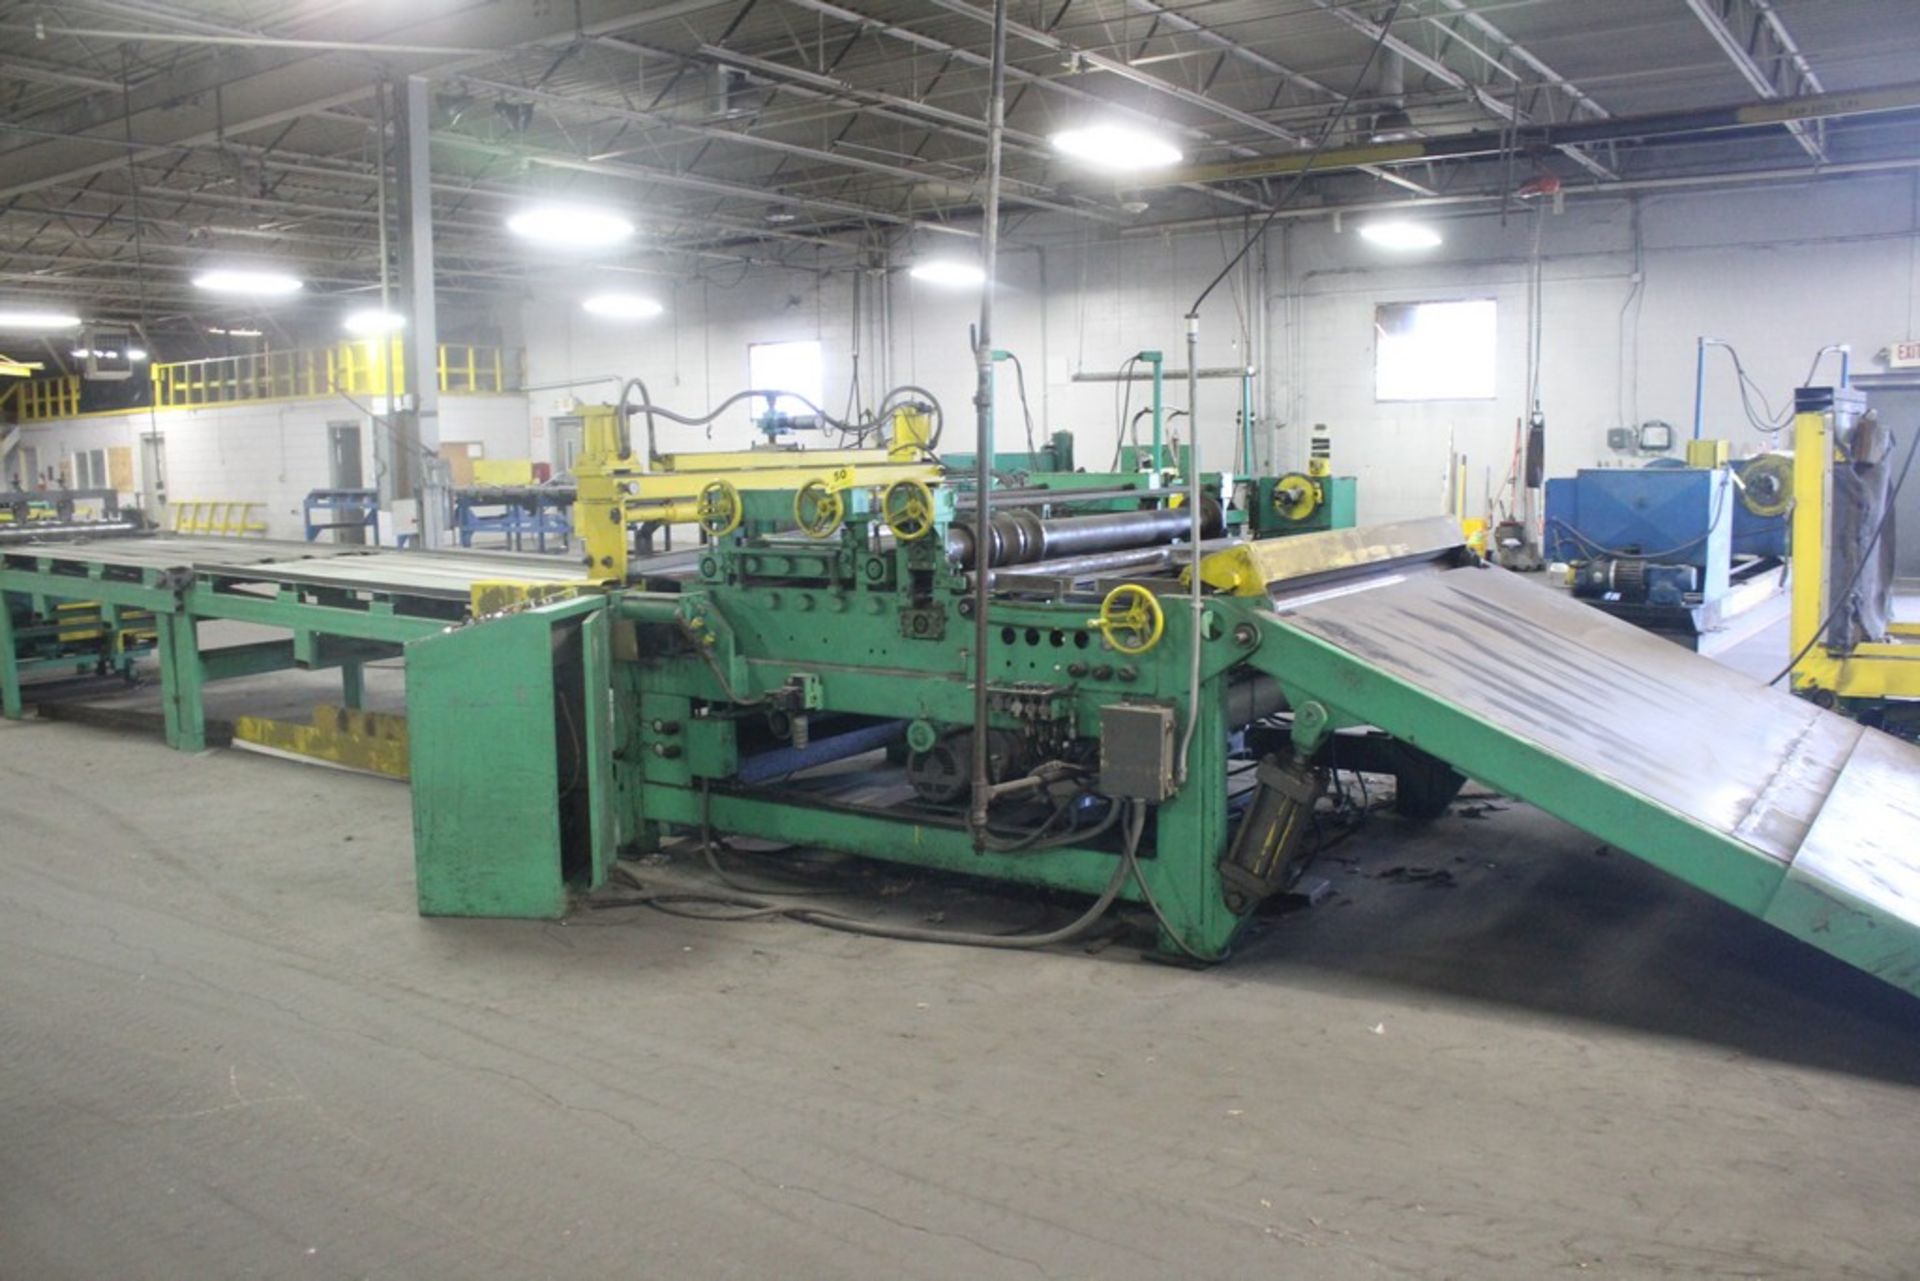 Iowa - Welty Way 72" x 14 ga Slear Line Consisting of: 3 over 4 Roll Leveler - 5" Arbor Slitter Head